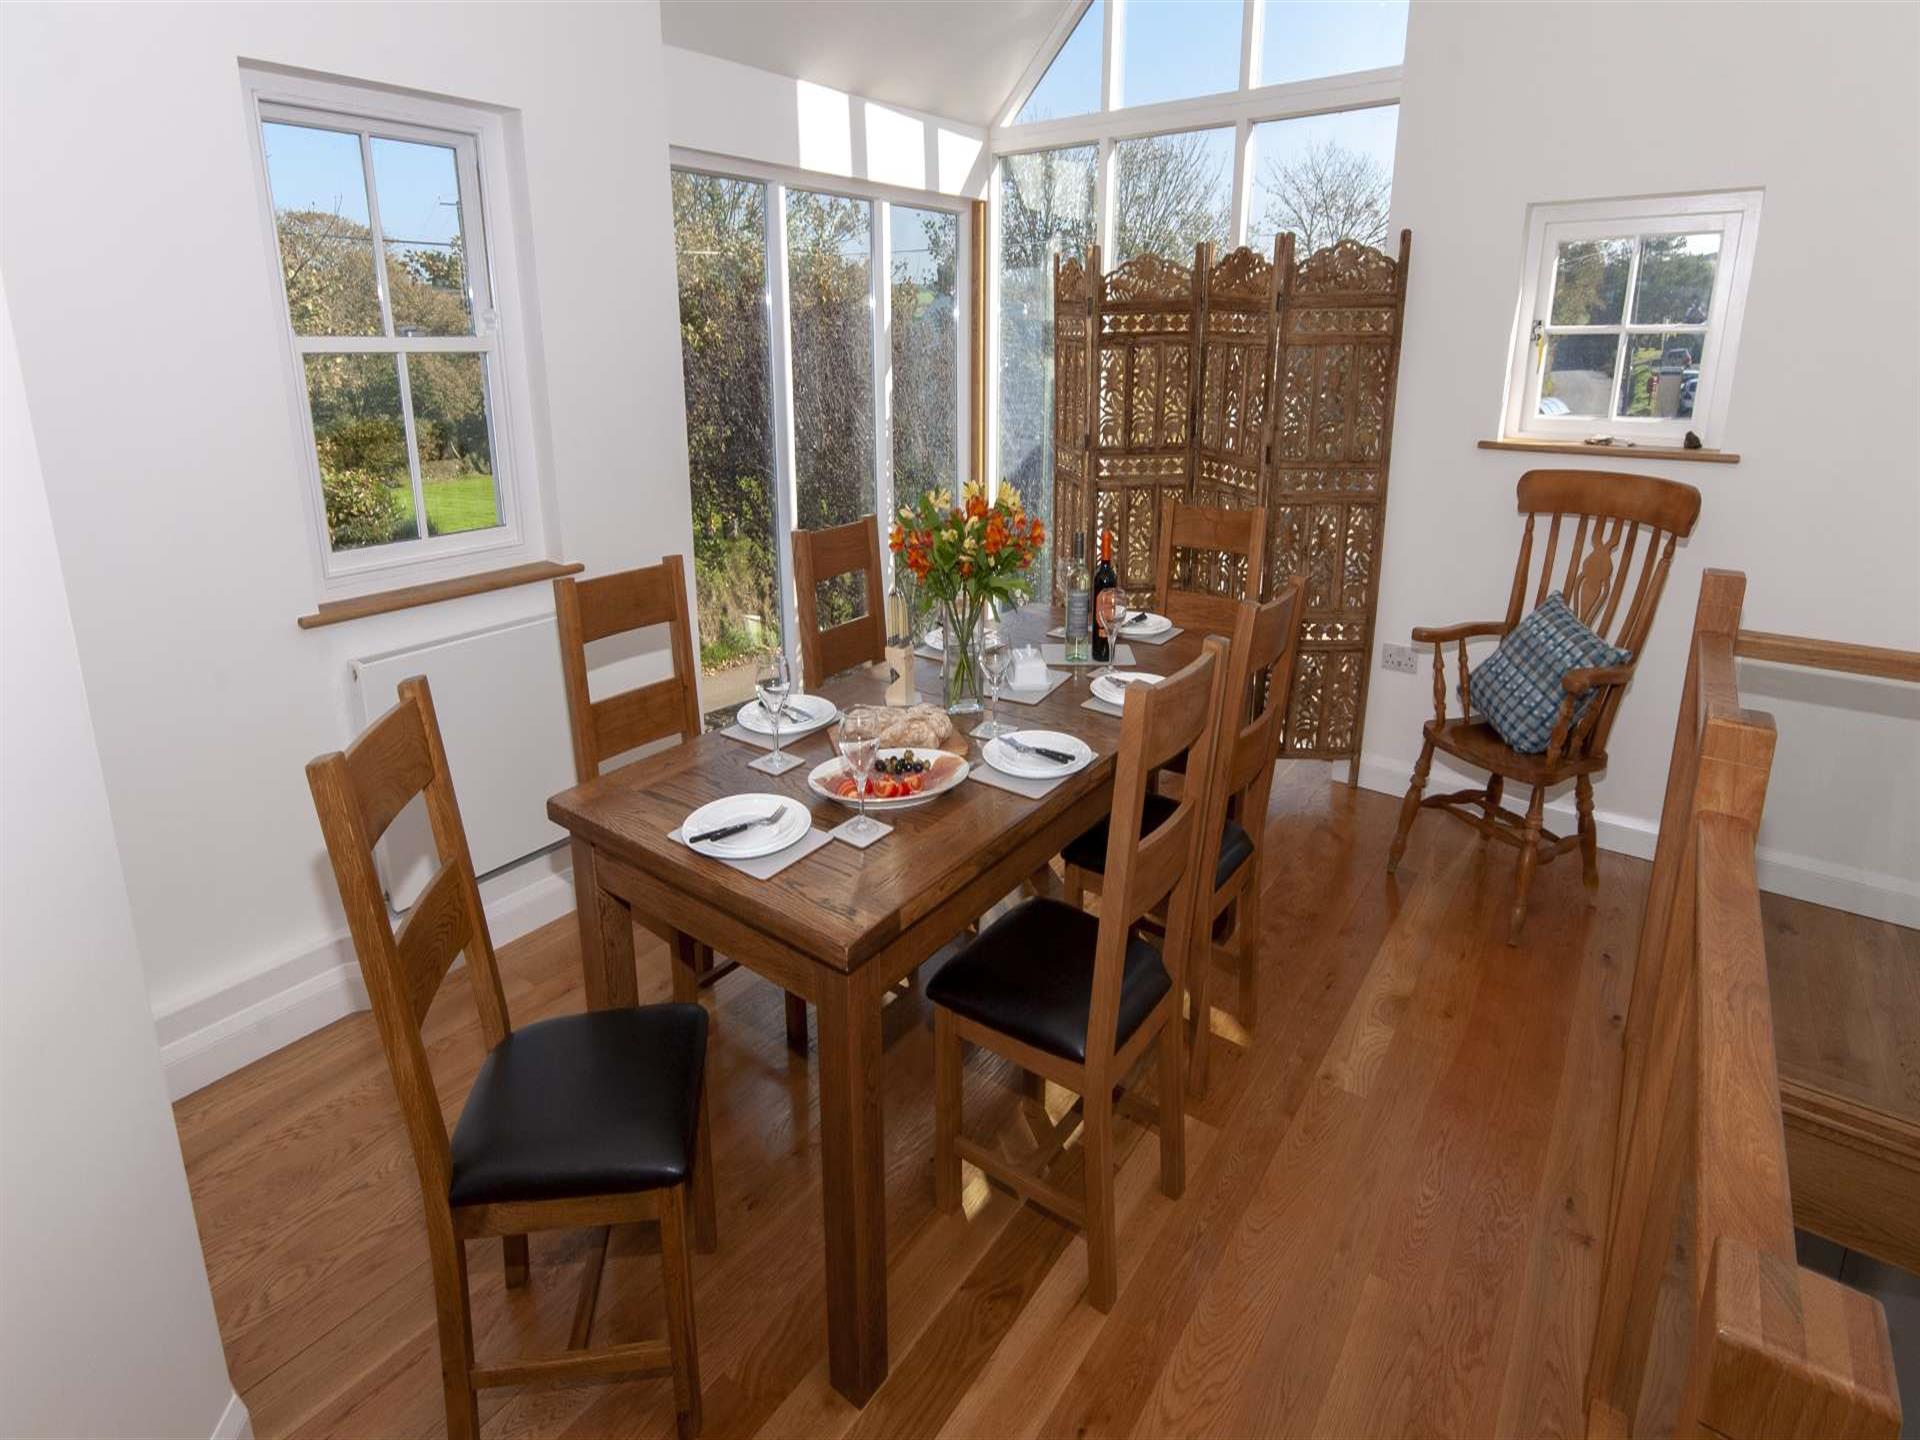 Porthgain holiday home - open plan dining area wit